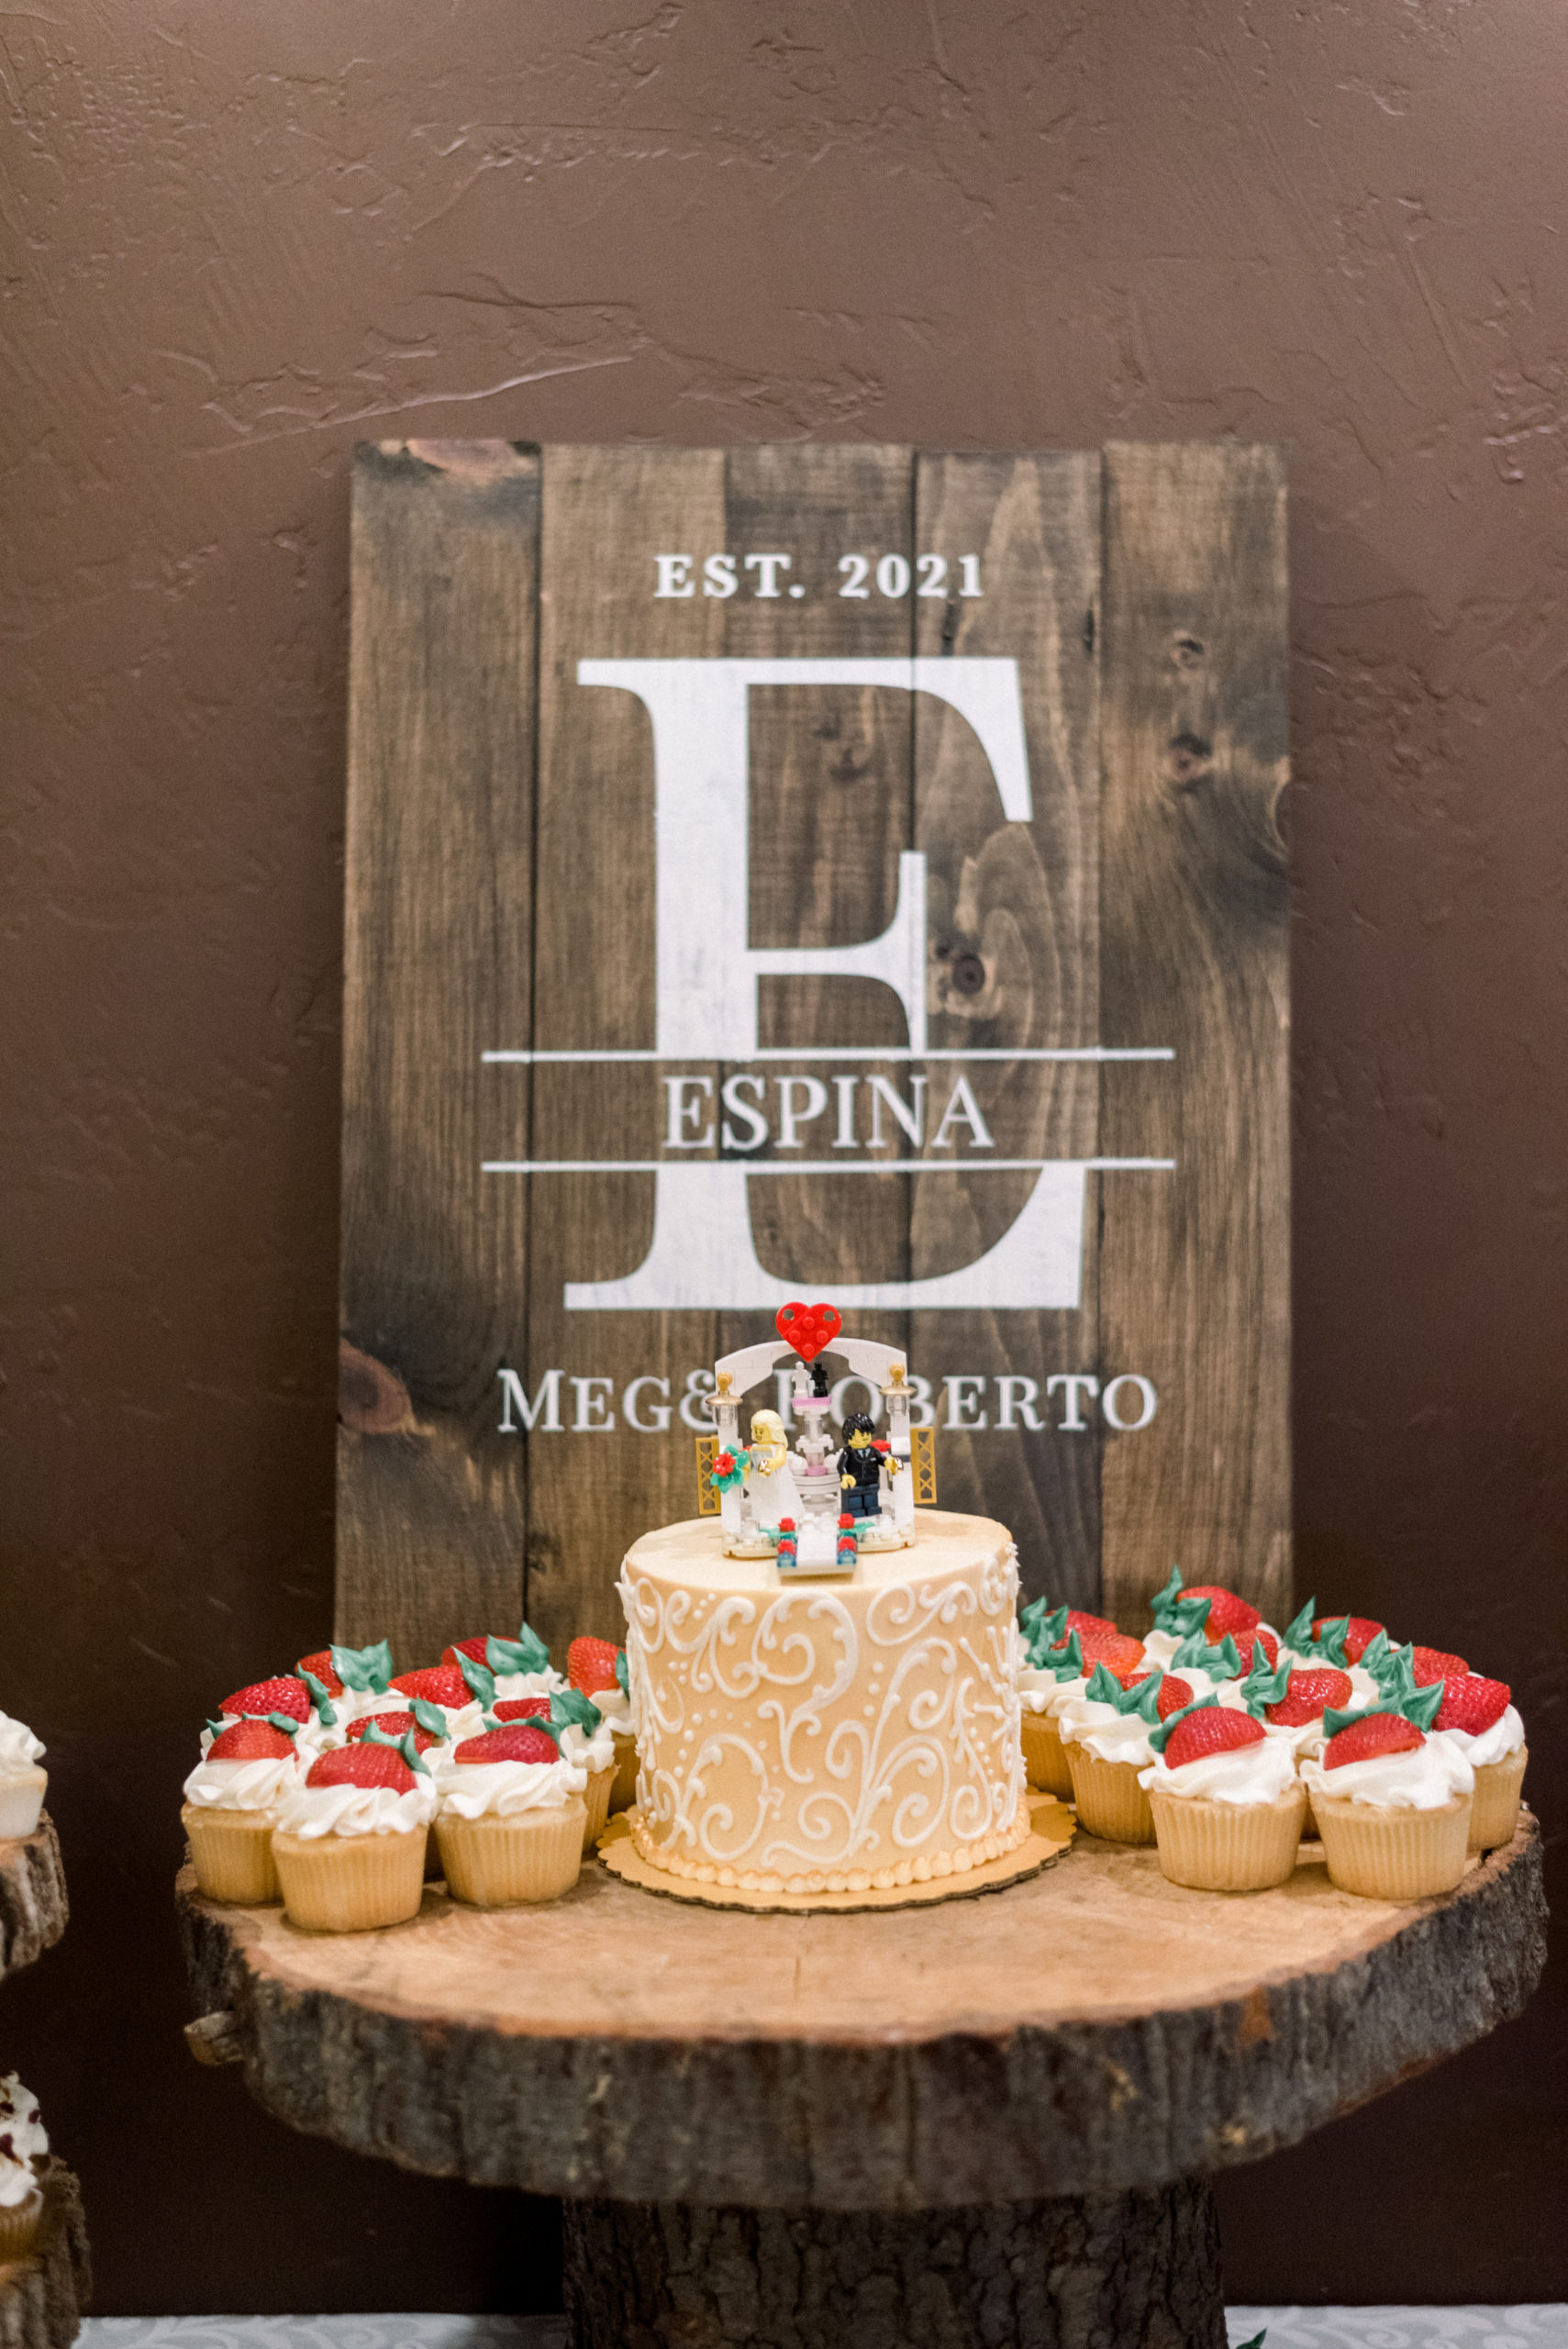 wooden sign beside wedding cake with lego bride and groom on top